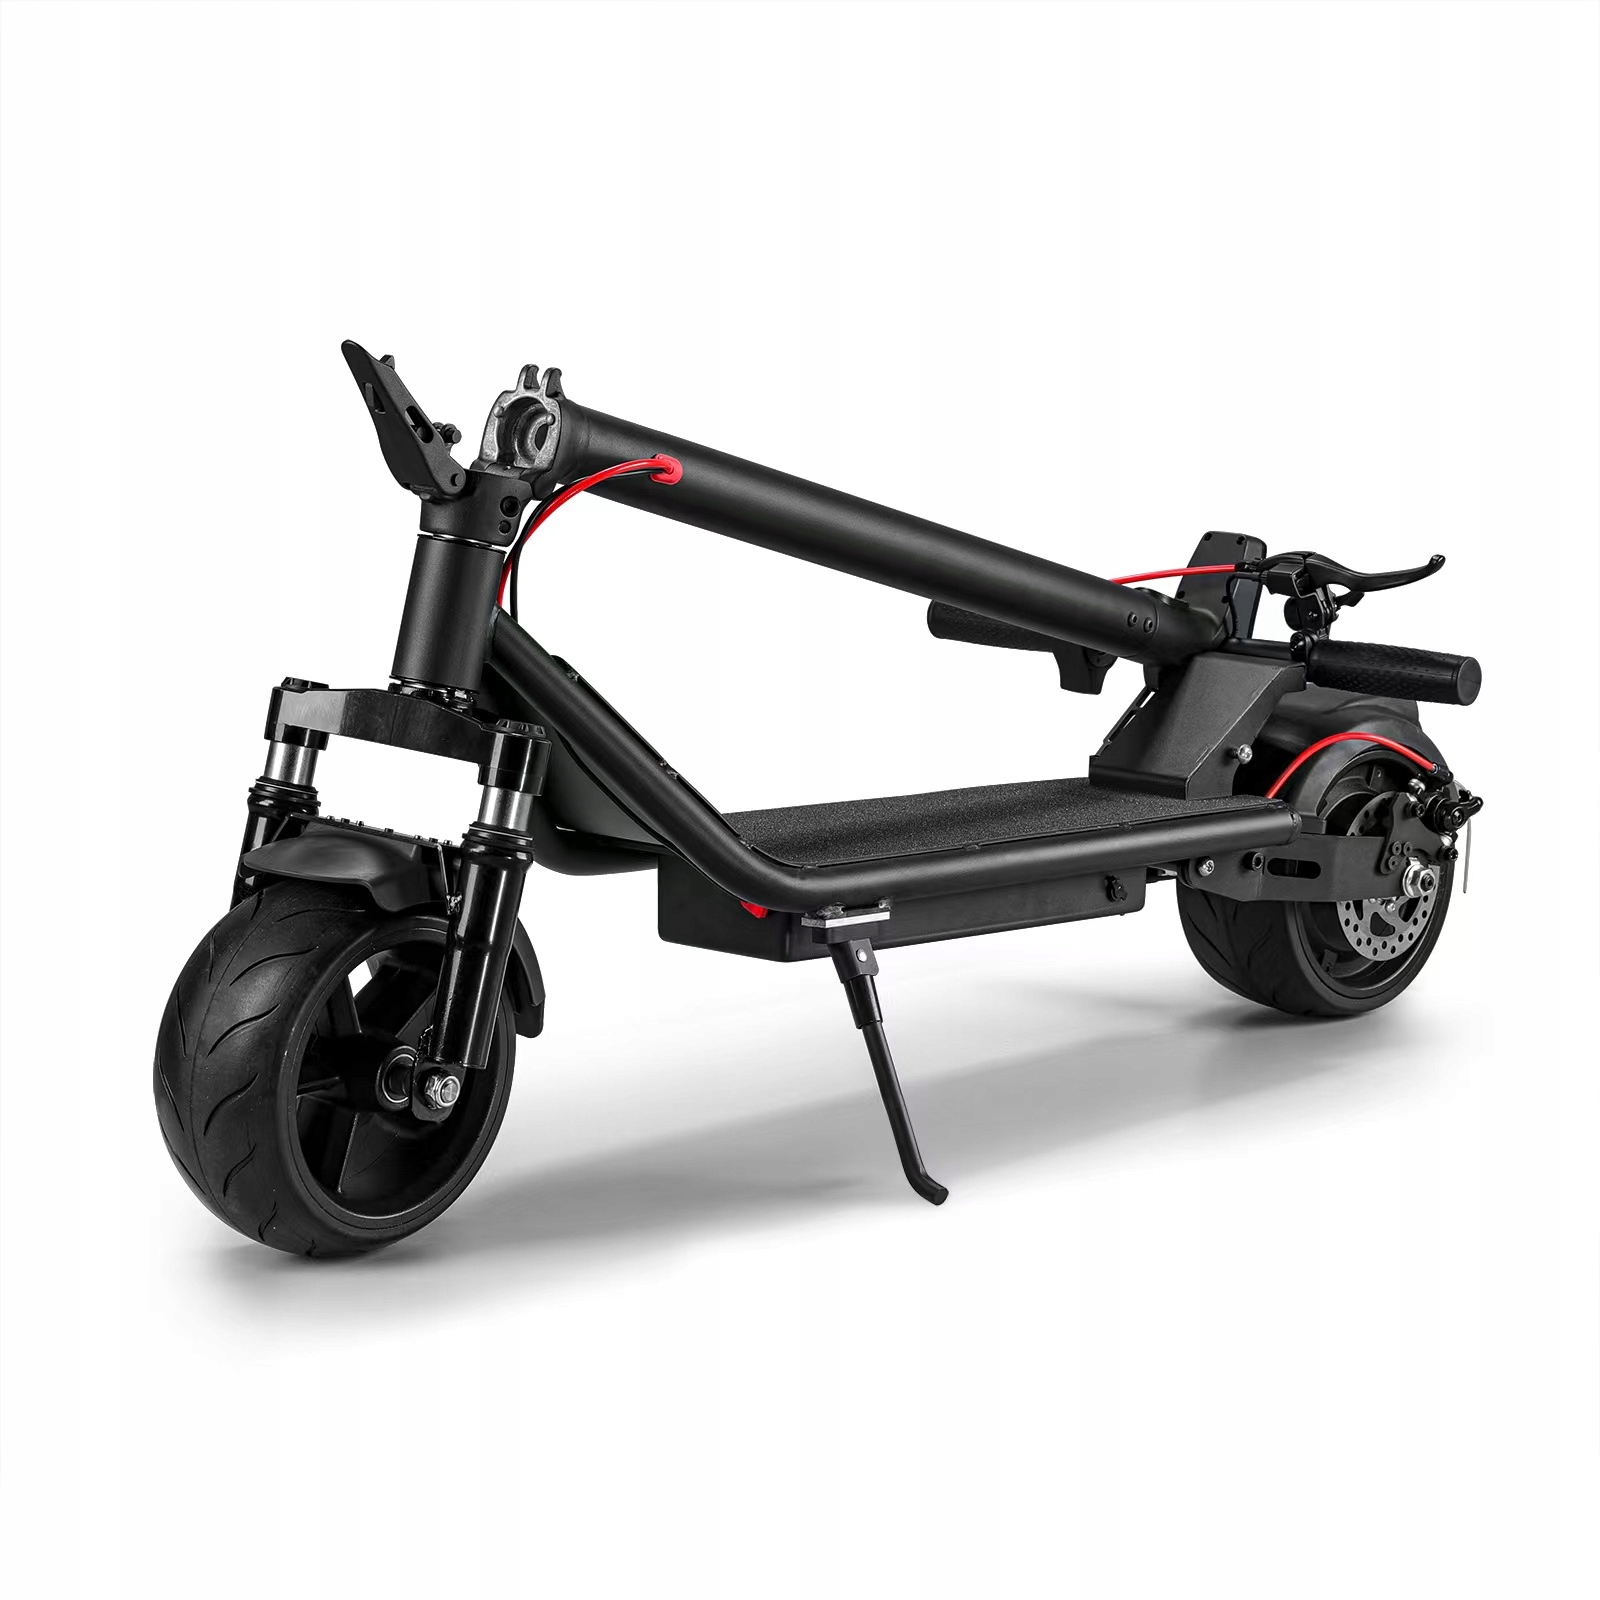 35Km/h 500w Electric Scooter Foldable W/App Manufacturer's code 4537364524195